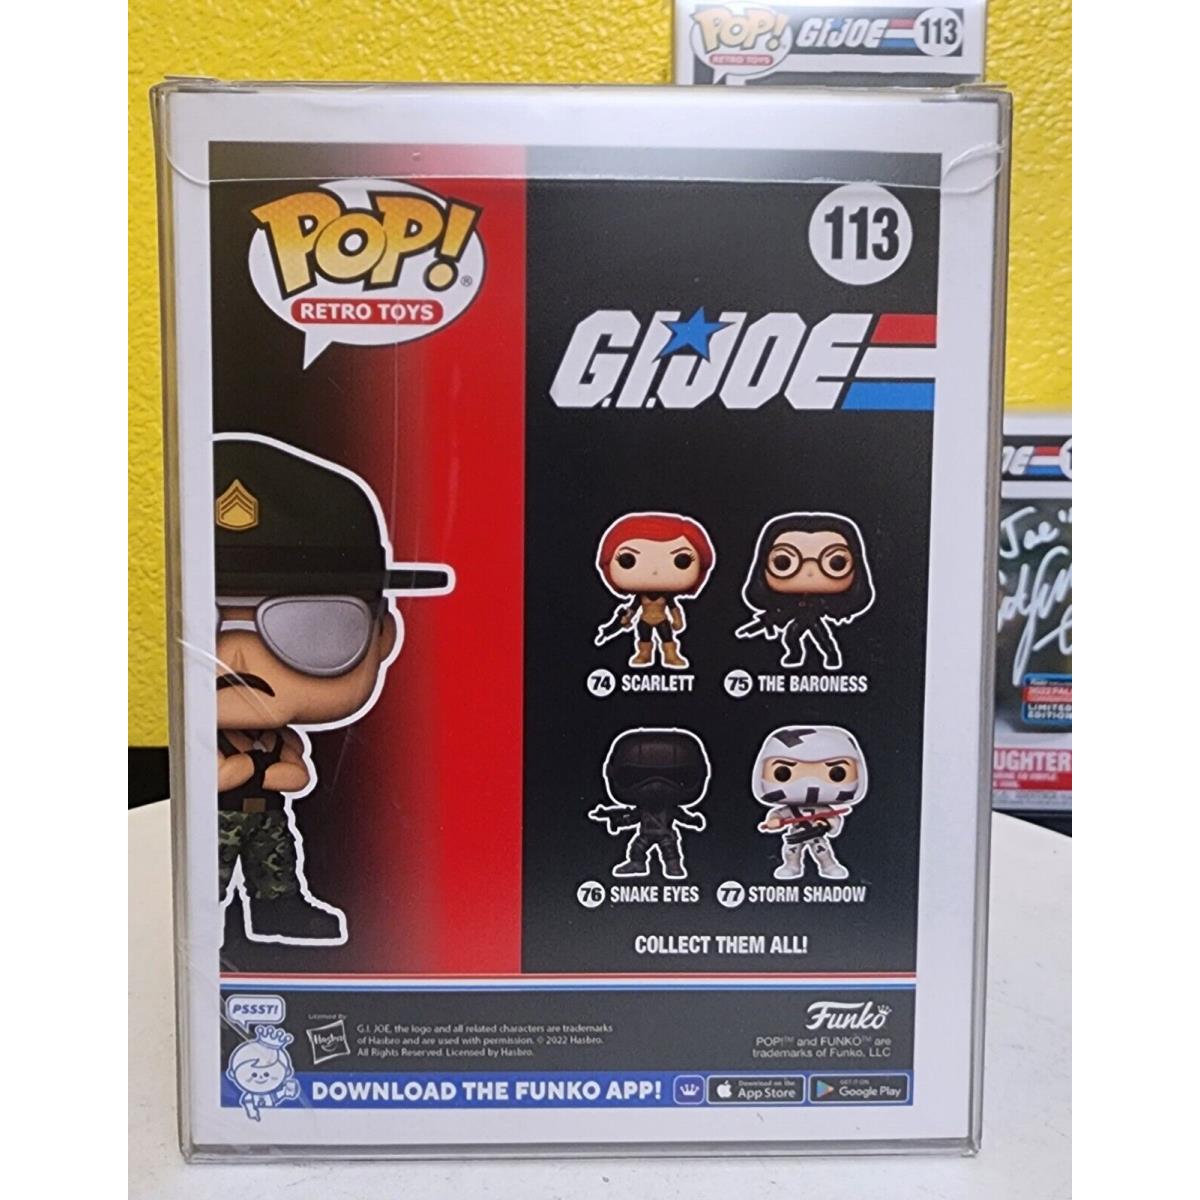 Funko Pop G.i. Joe Sgt. Slaughter 113 Nyc Convention Exclusive Autographed